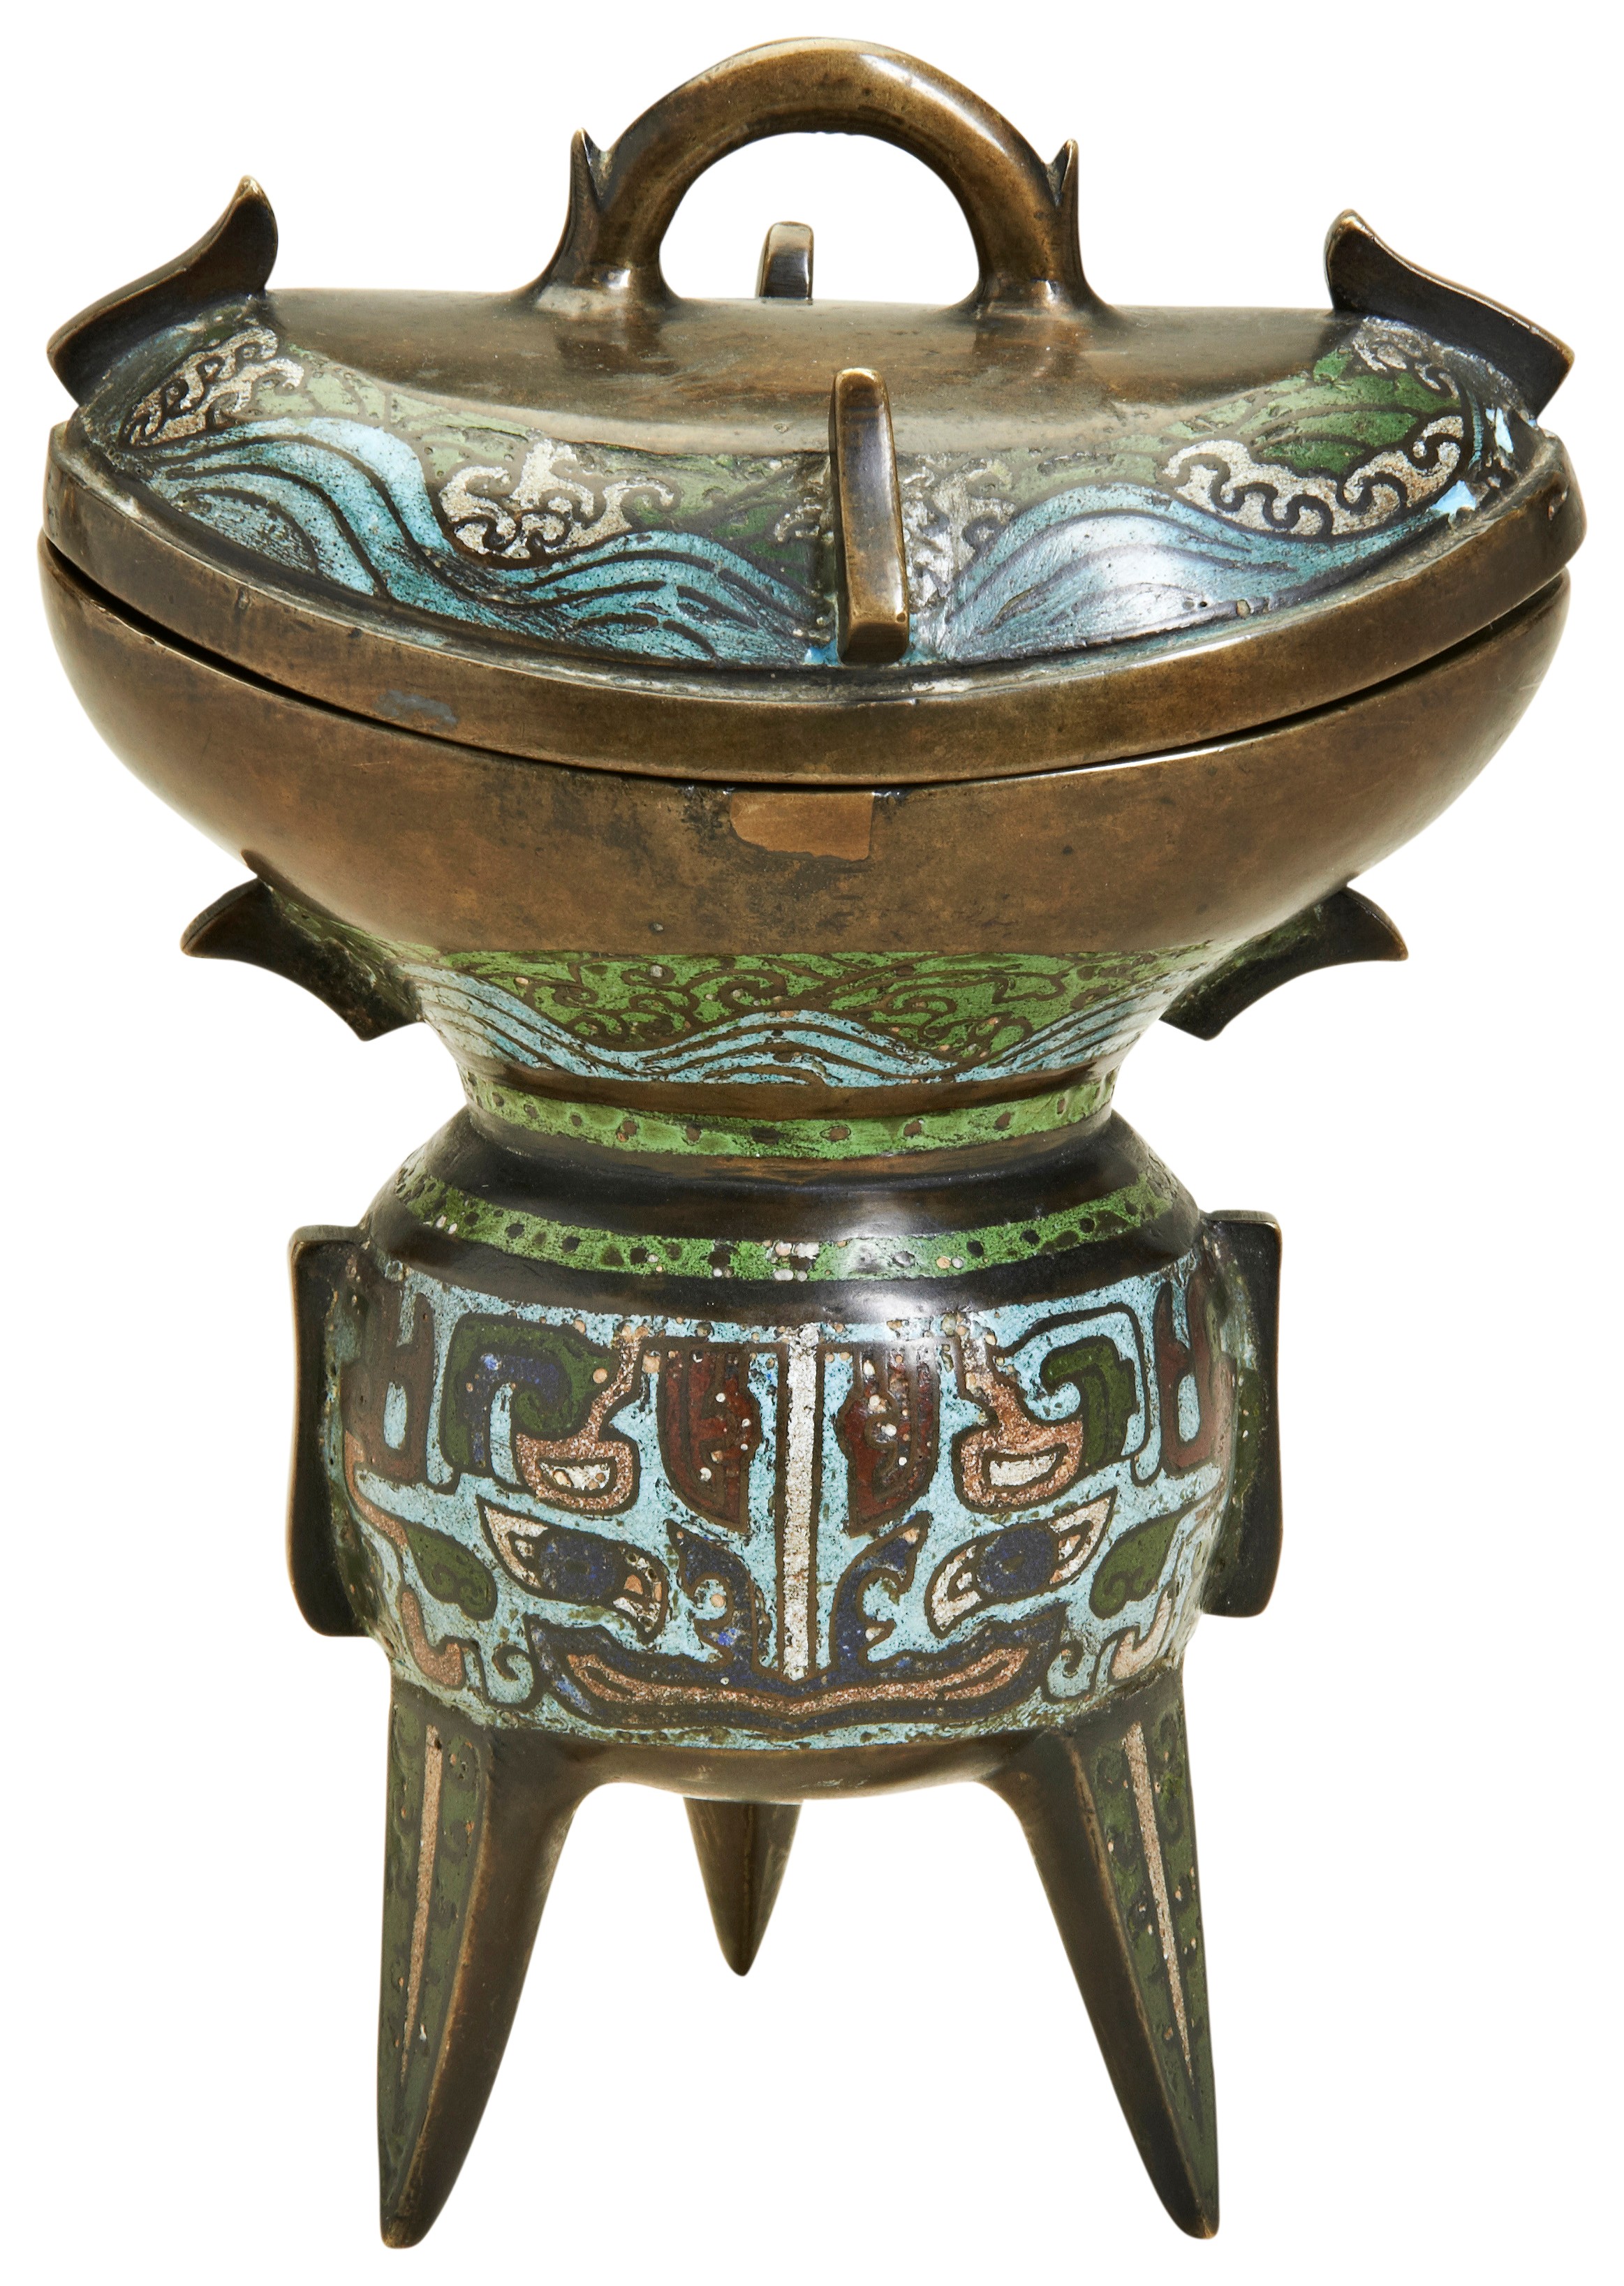 A BRONZE AND CHAMPLEVE ENAMEL ARCHAIC-STYLE COVERED WINE VESSEL, JUE QING DYNASTY, 18TH / 19TH